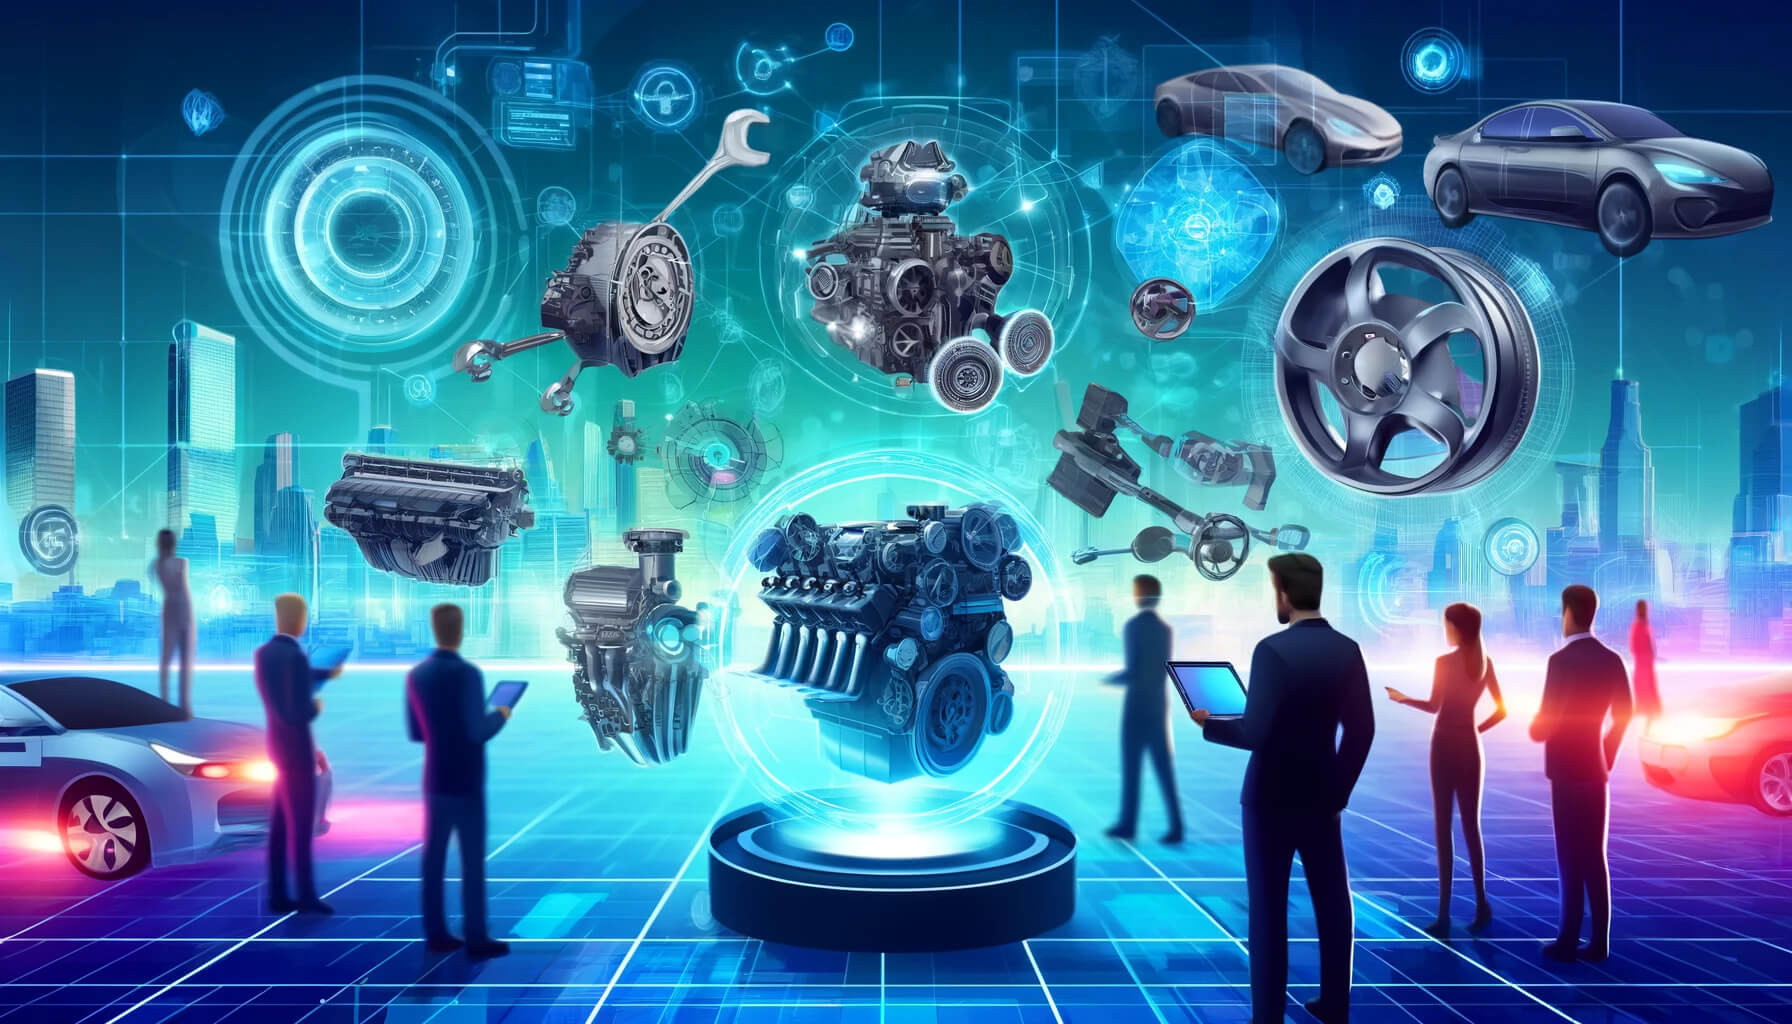 Overview of Online Auto Parts Shopping